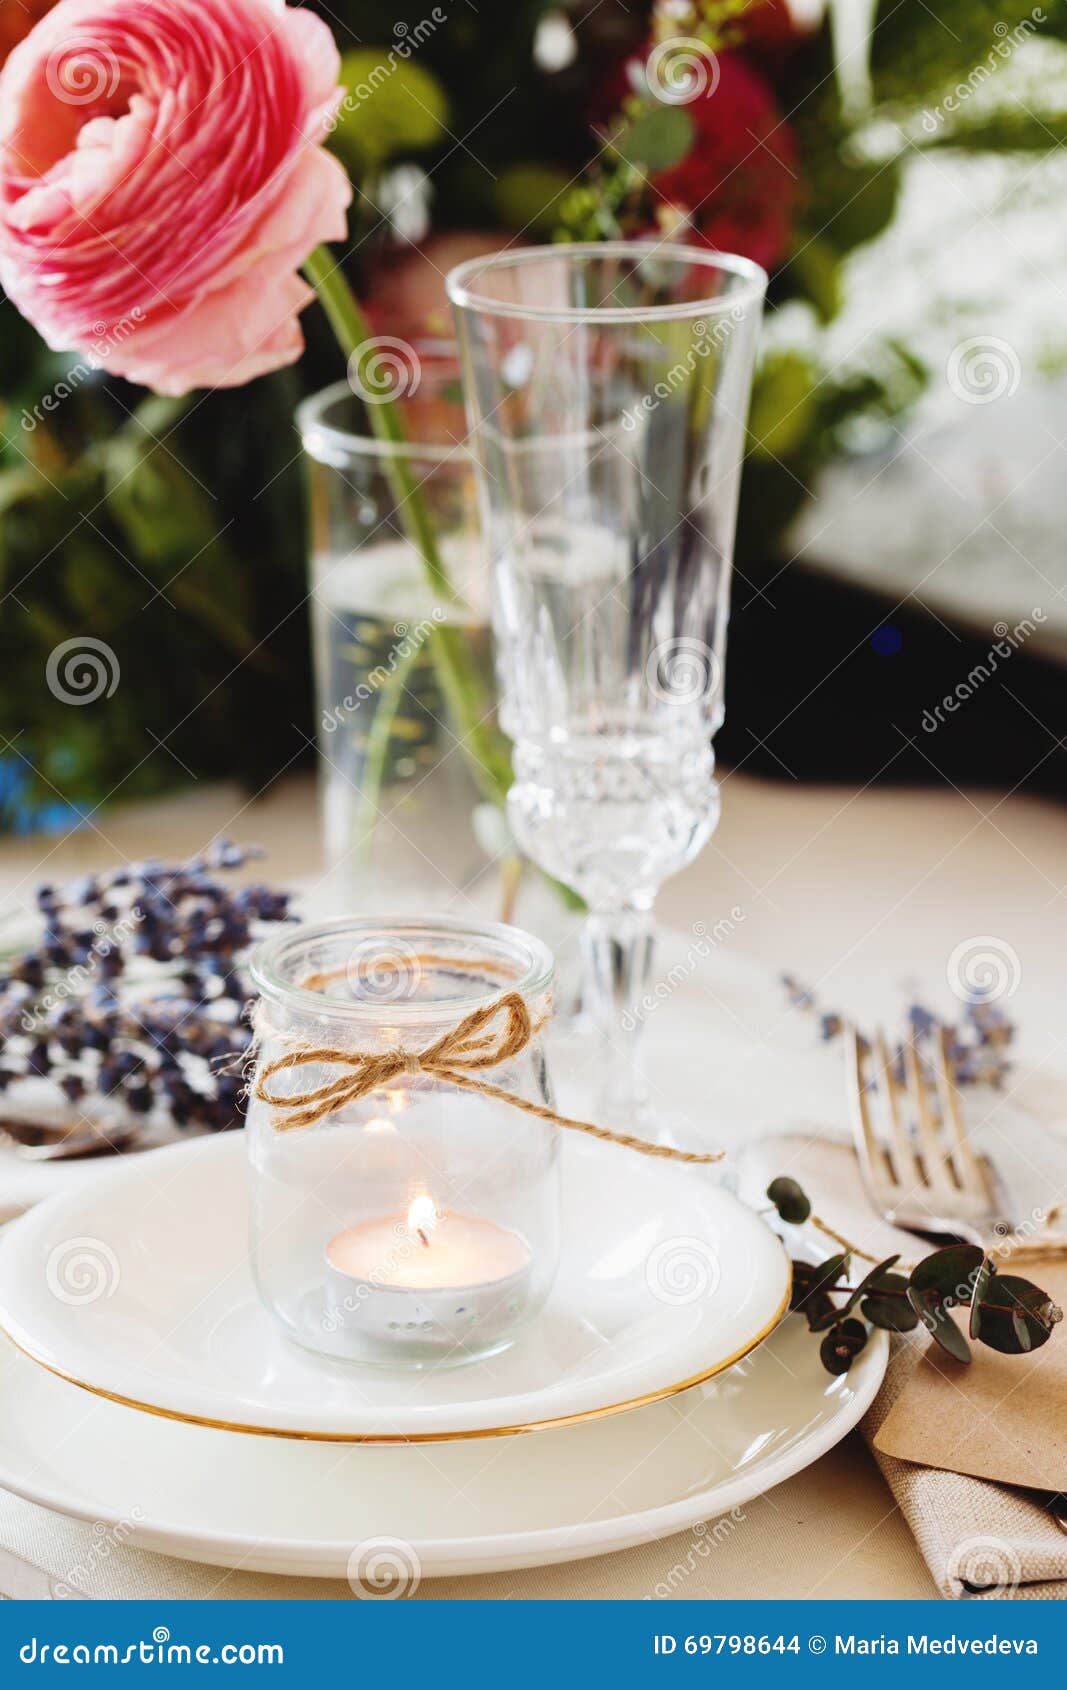 Dining Table Setting At Provence Style Stock Photo Image Of